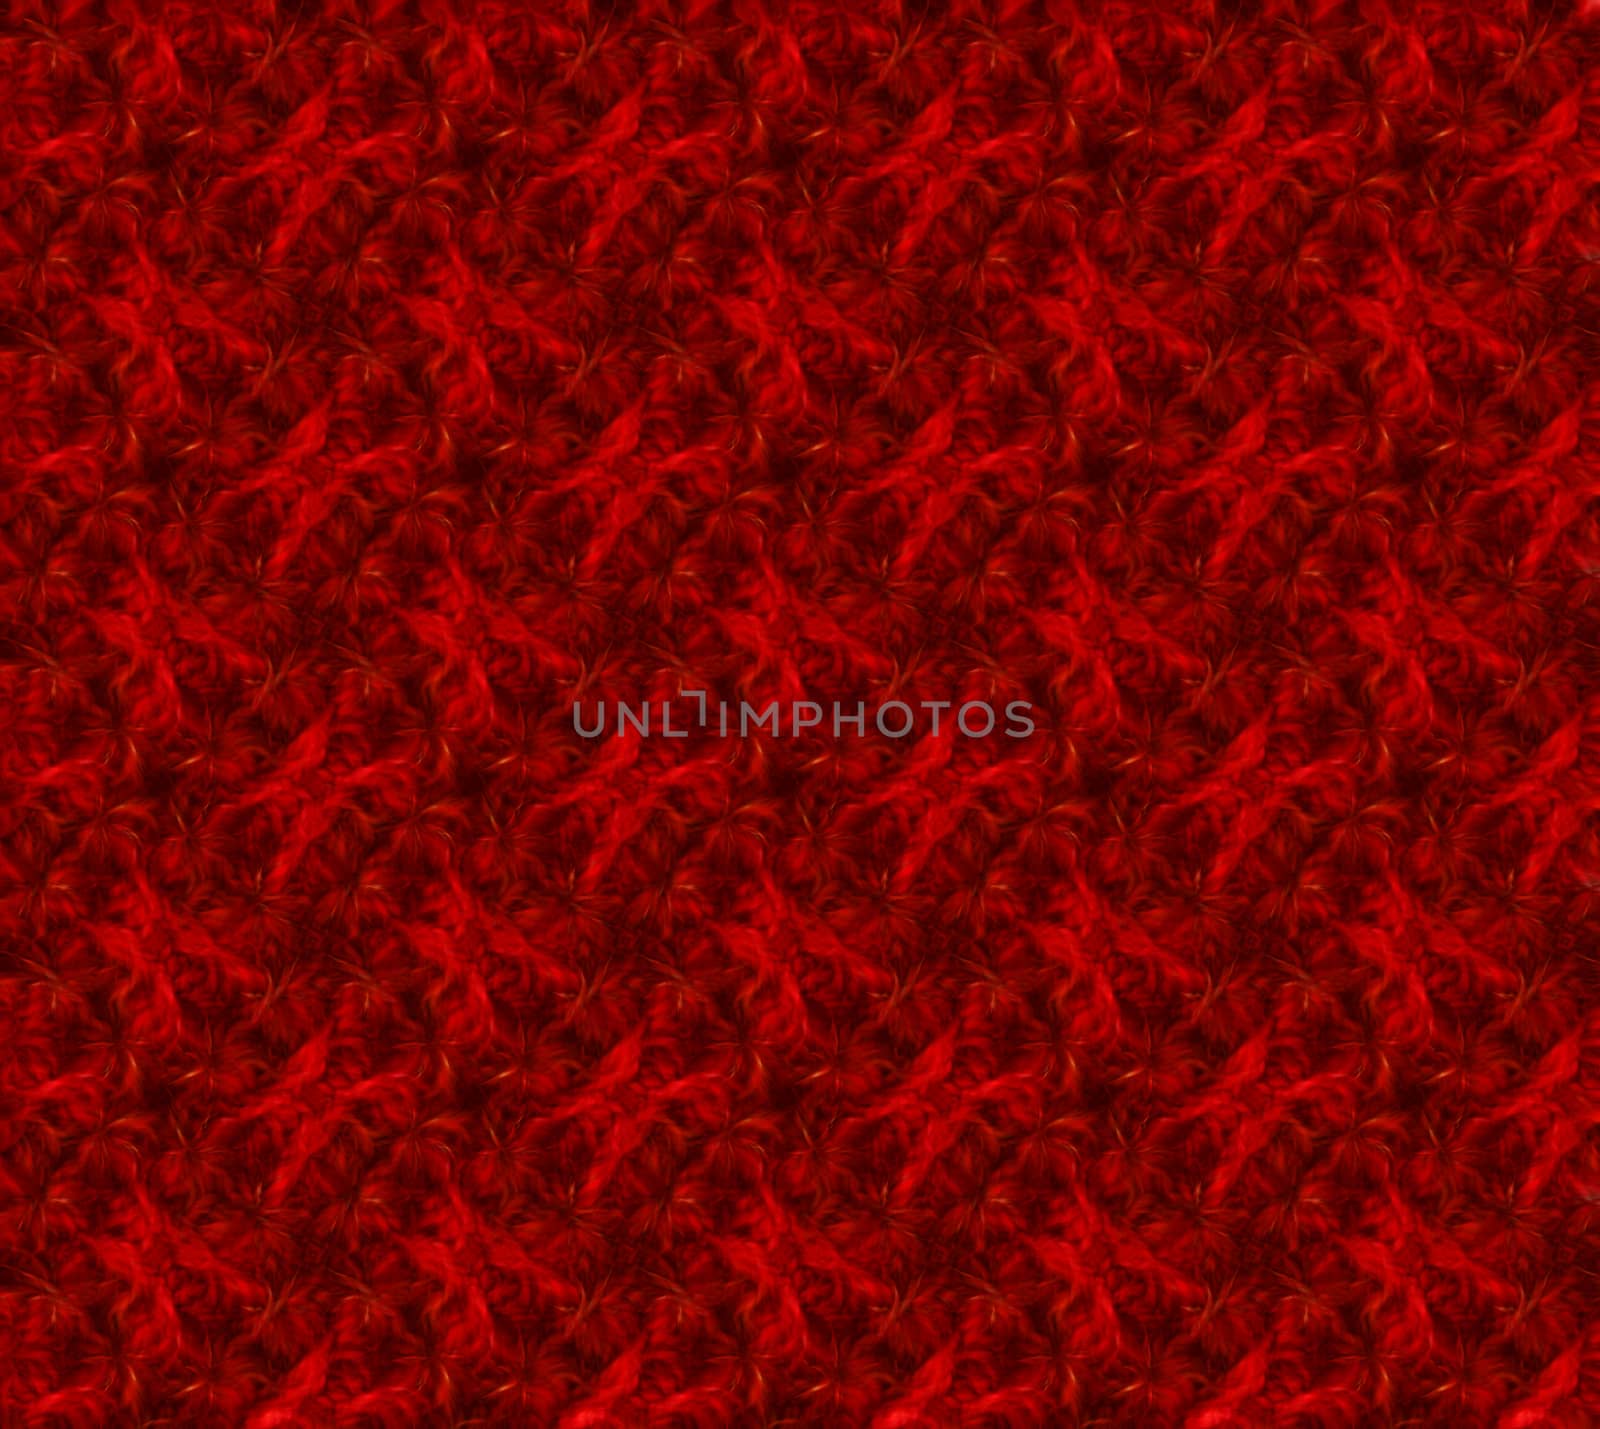 Abstract red tones with a blurred mosaic pattern on a dark background